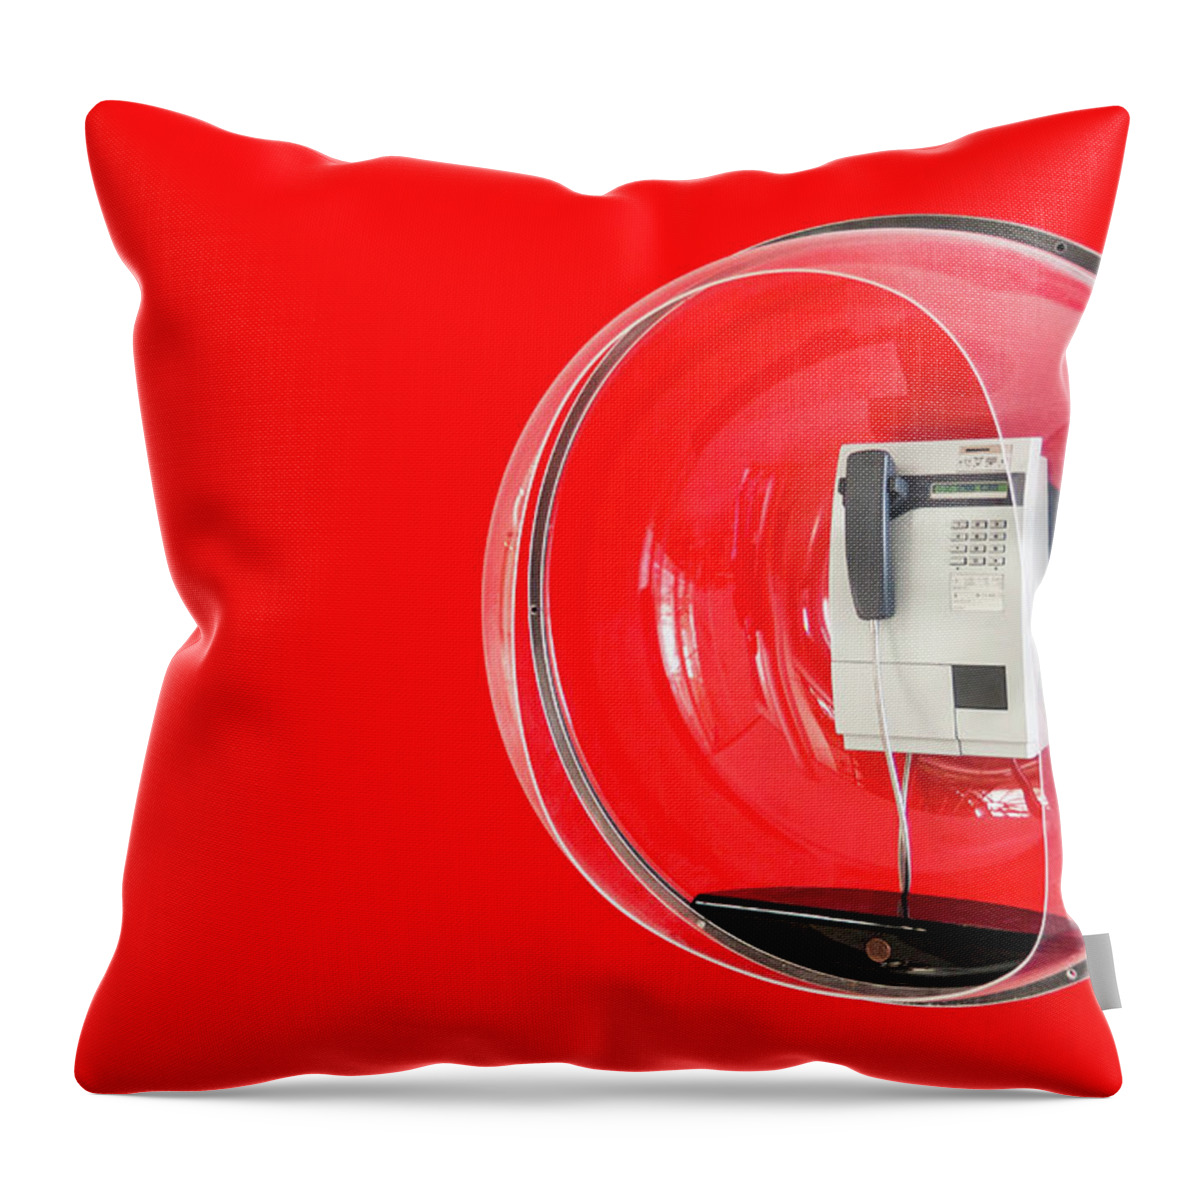 Pay Phone Throw Pillow featuring the photograph Telephone In Decorative Plastic Bubble by Manuel Sulzer